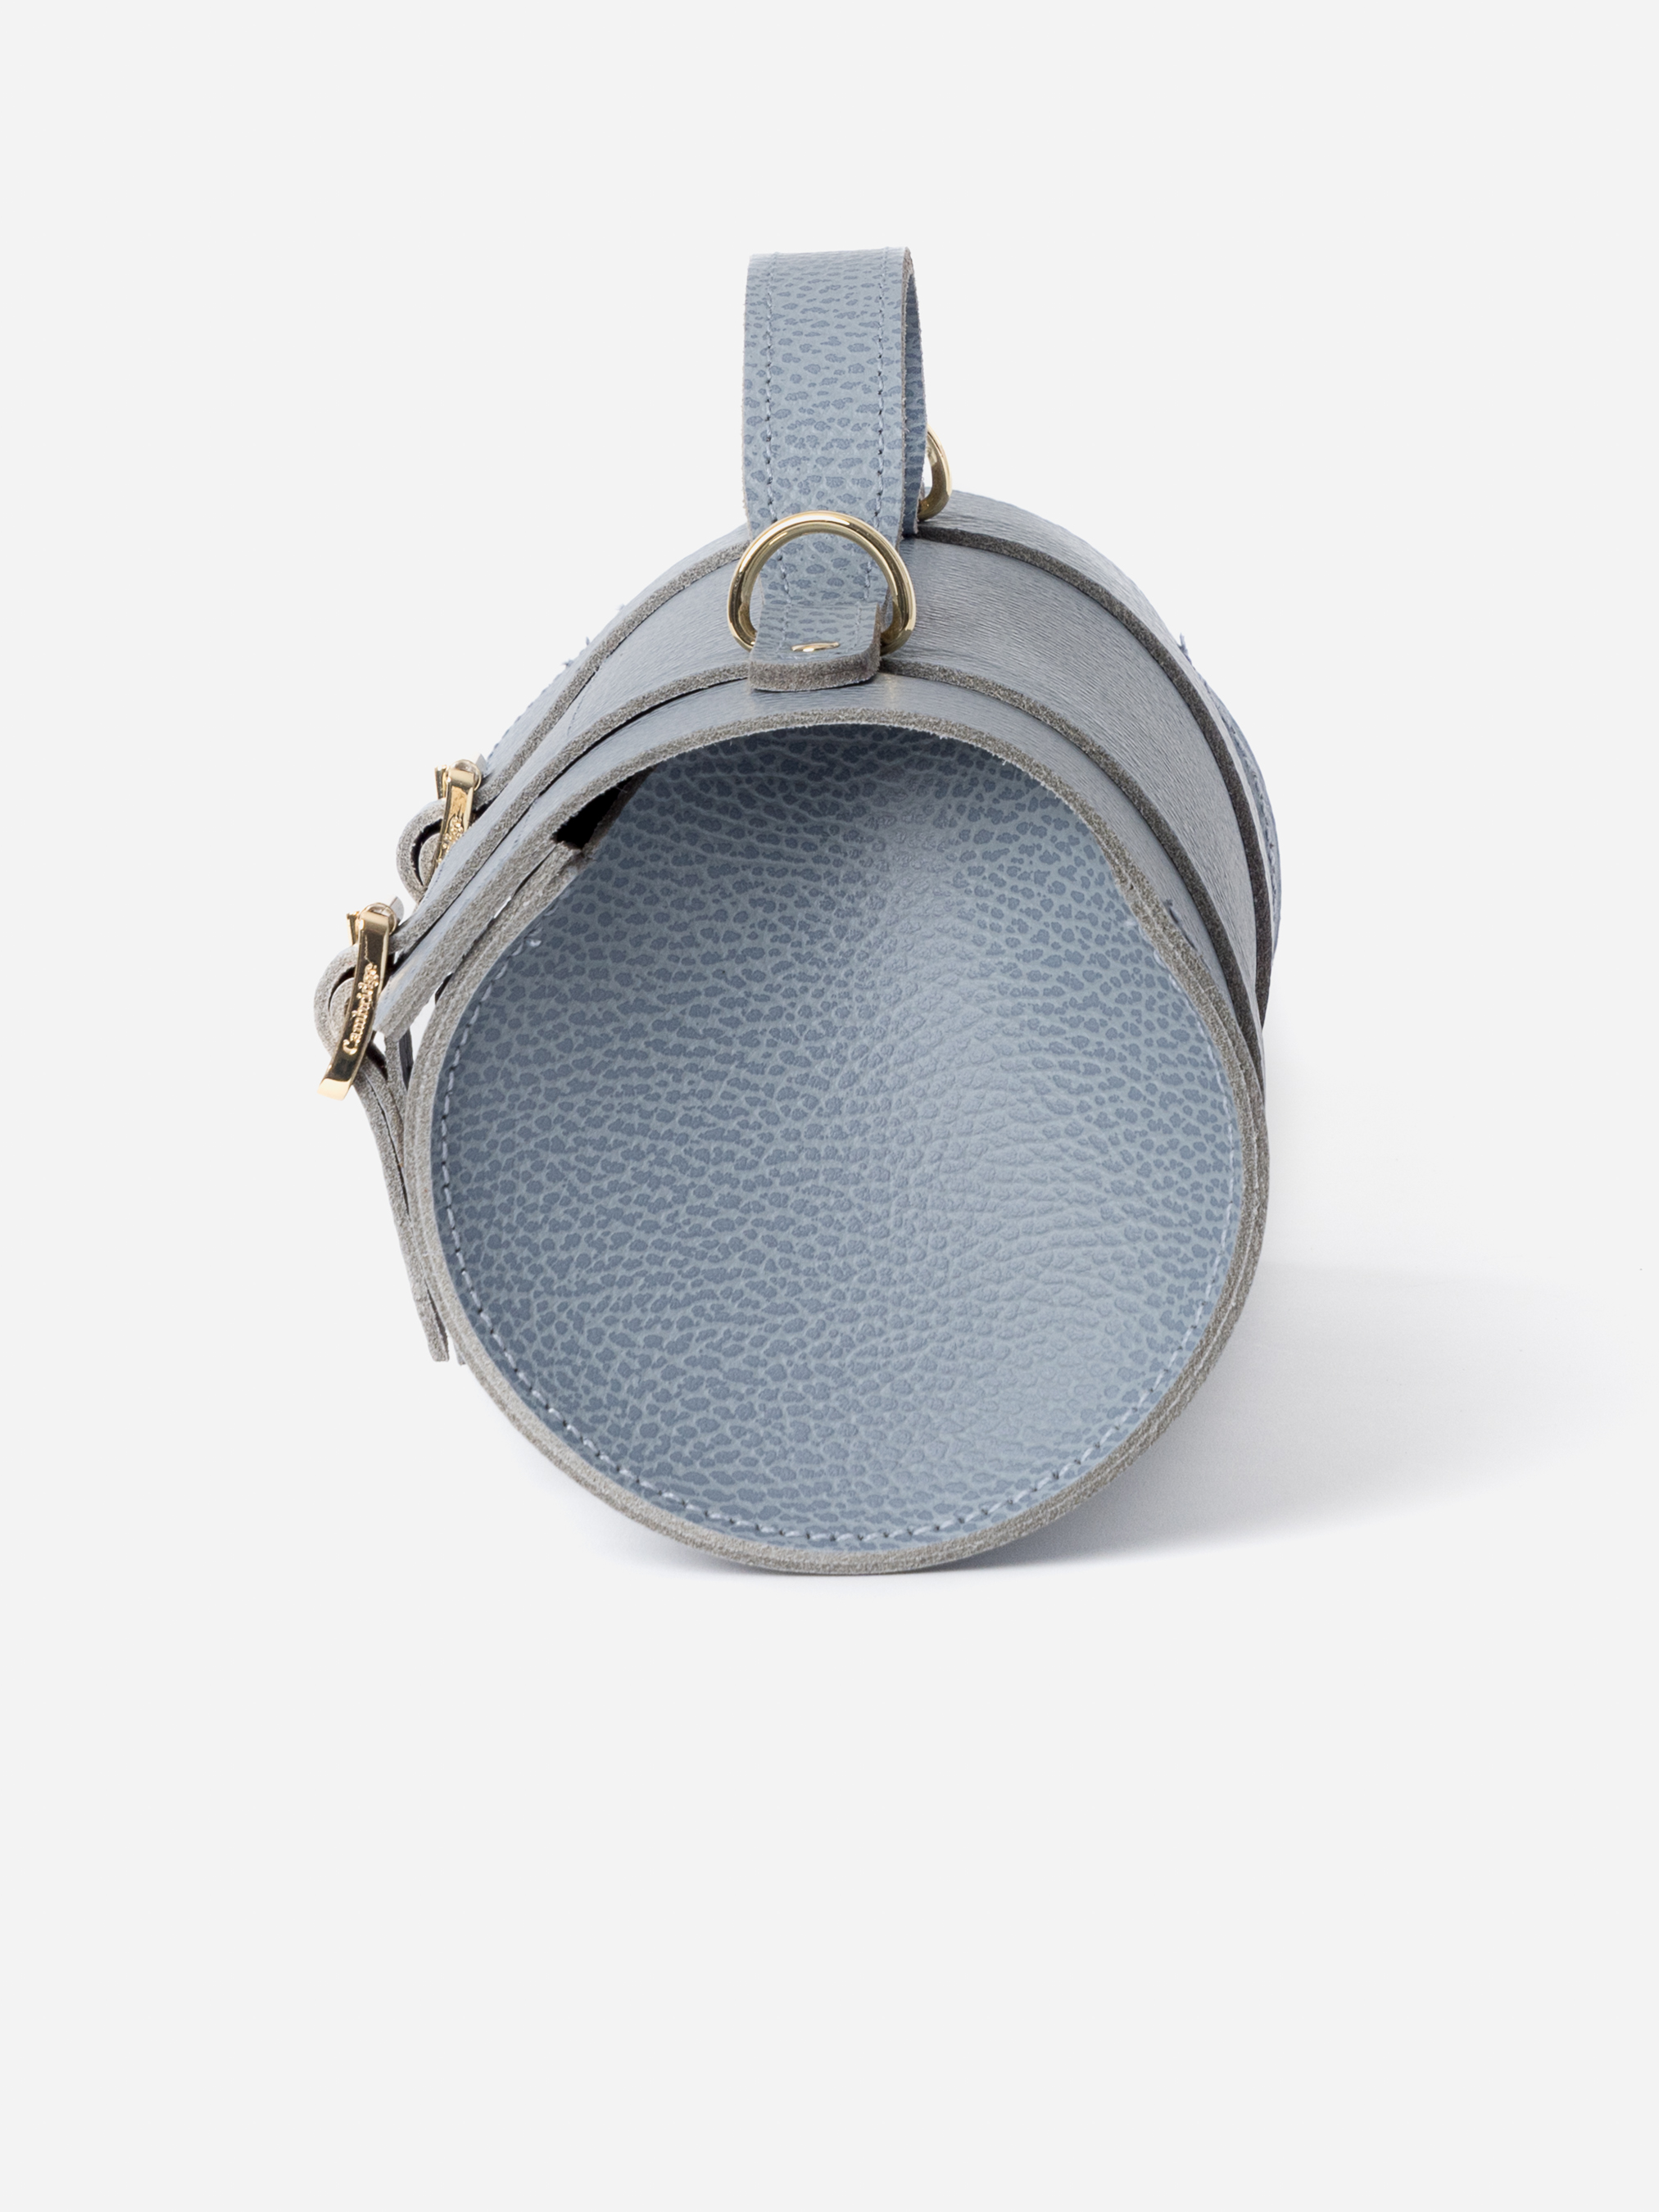 The Bowls Bag - French Grey Celtic Grain